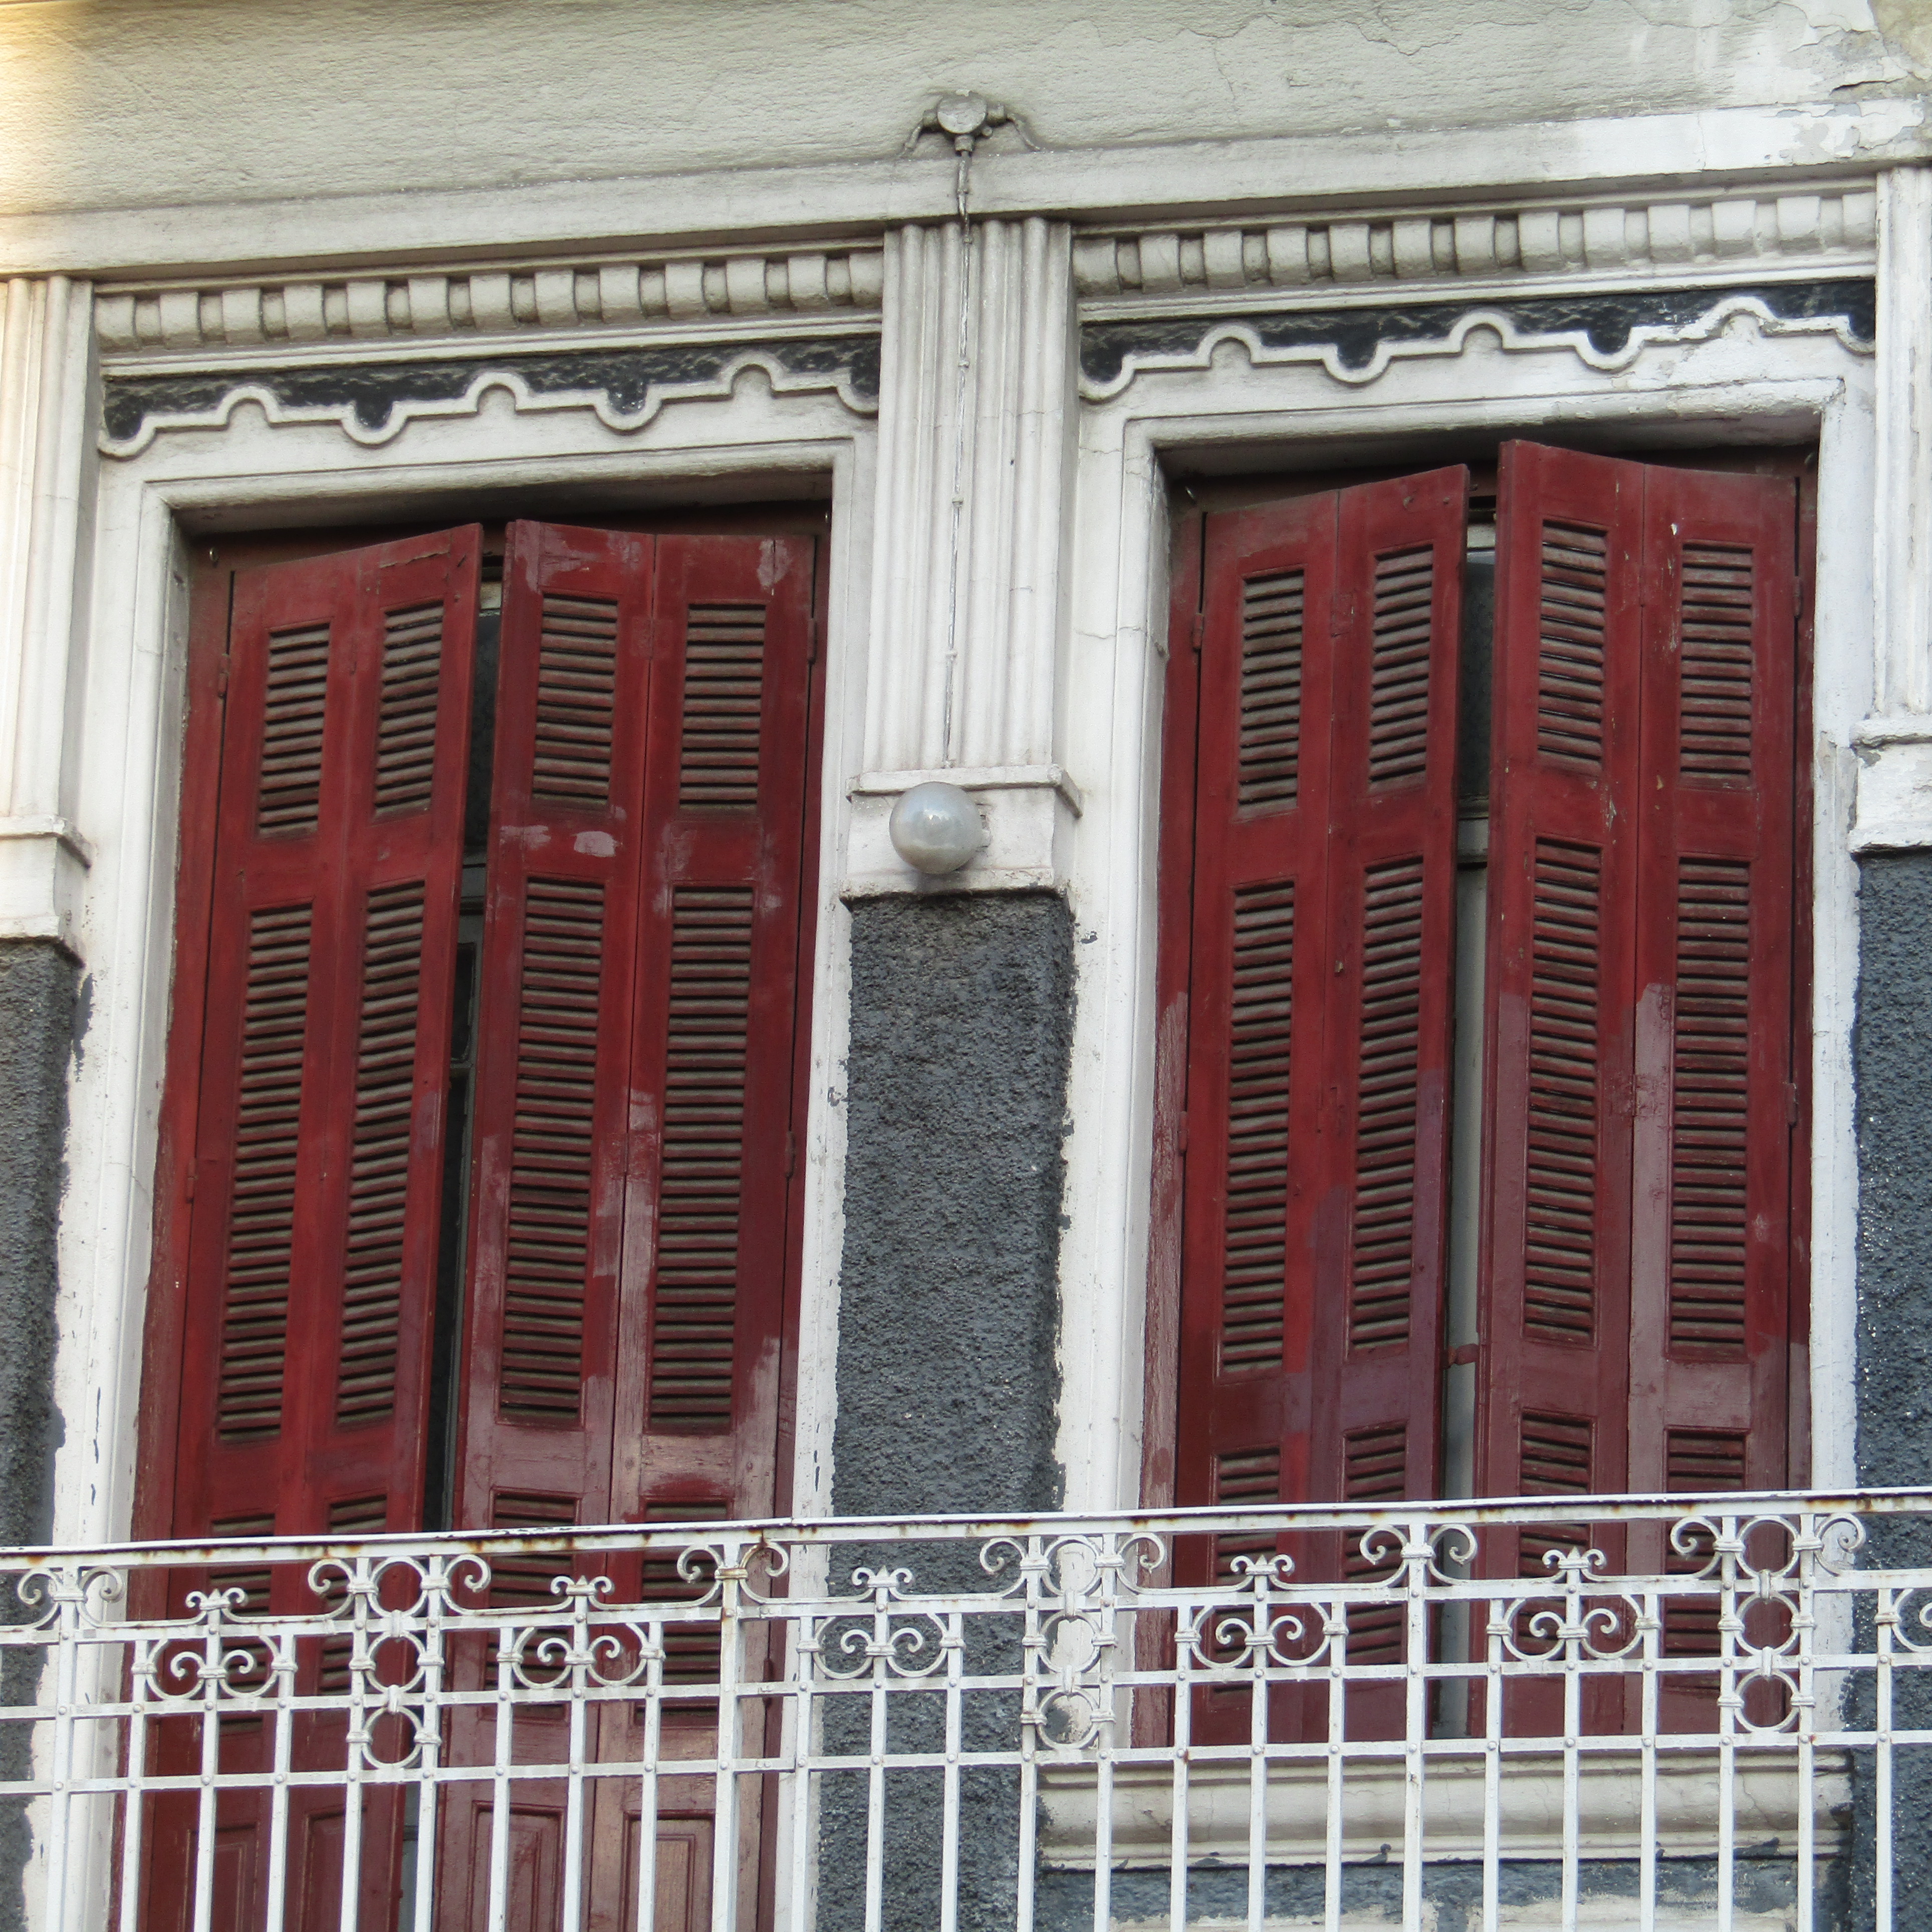 General view of windows